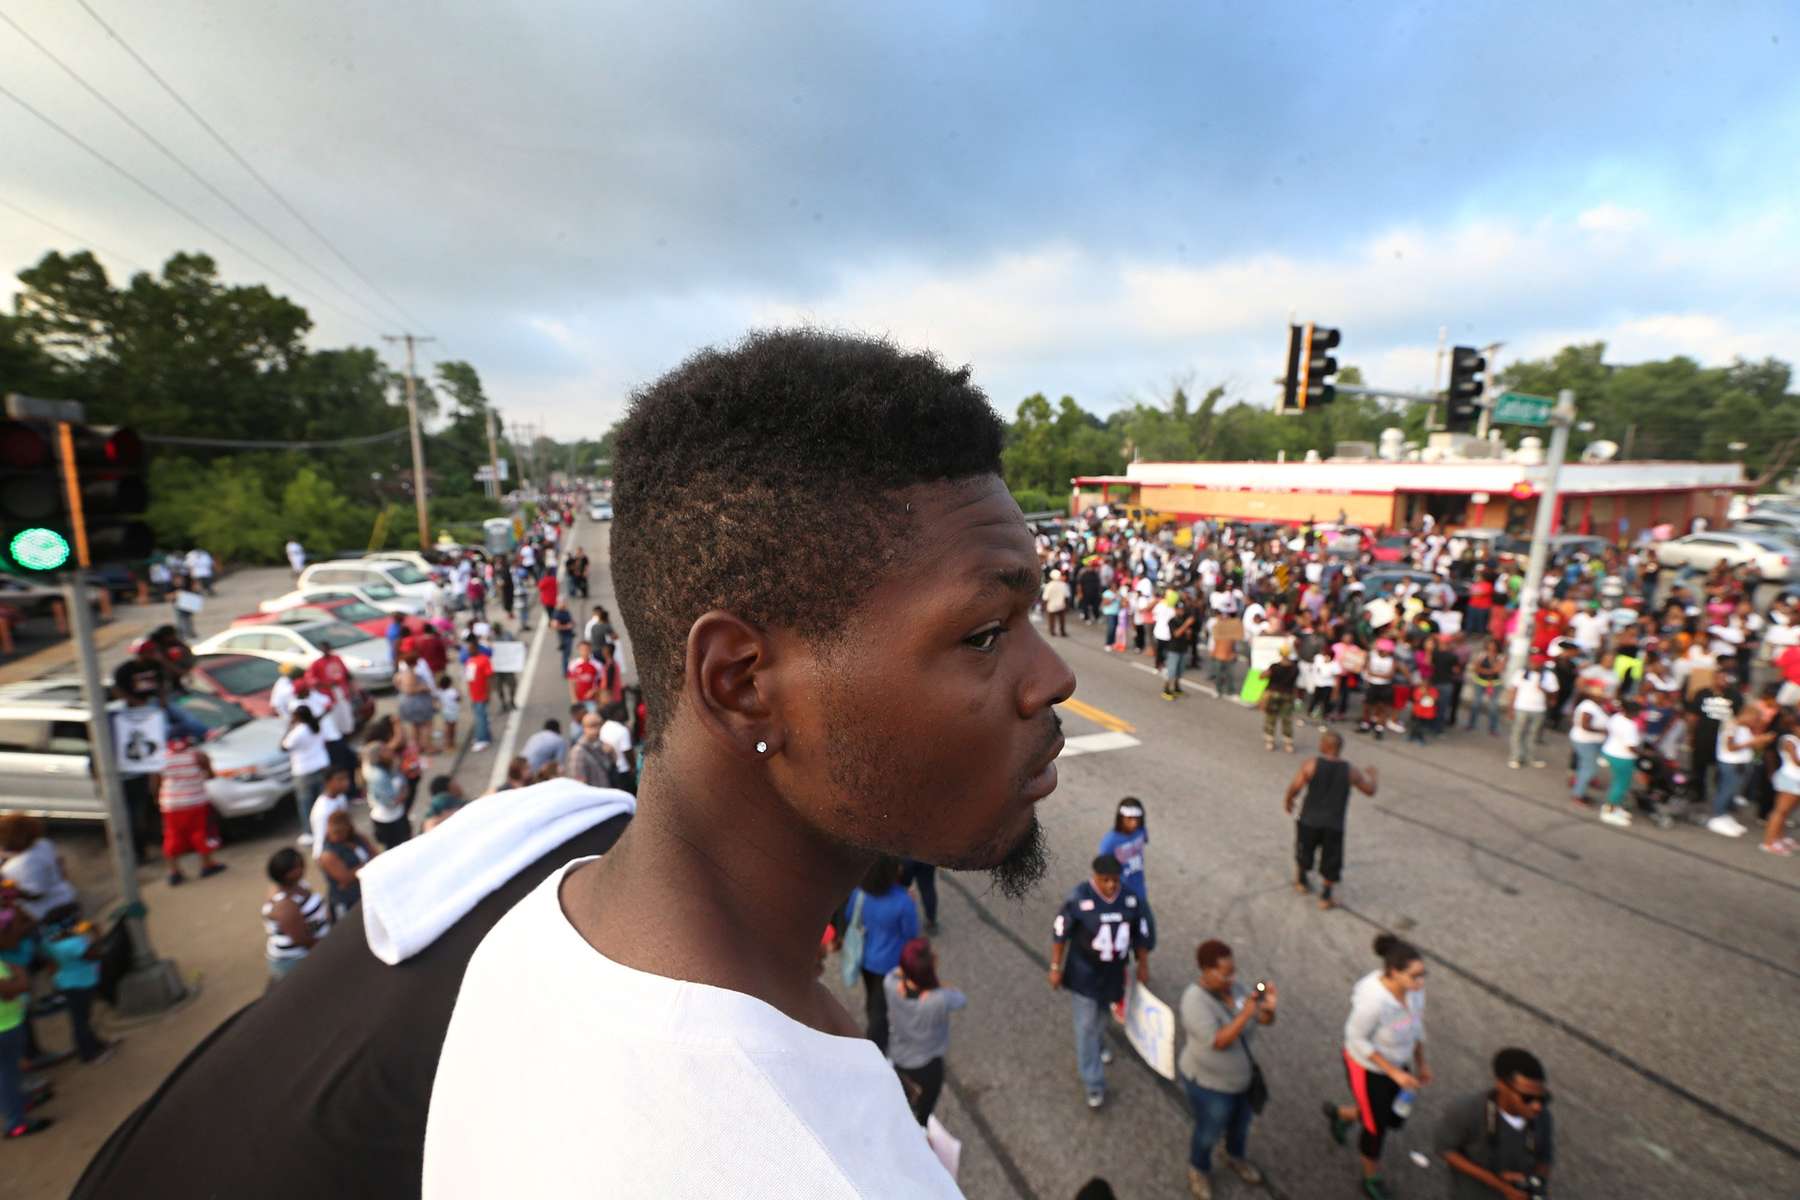 Jamel Easley, from the Walnut Park neighborhood in St. Louis city, takes in the scene from on top of a van parked at the corner of Canfield Drive and W Florissant Avenue on Sunday, Aug. 17, 2014.Photo By David Carson, dcarson@post-disptch.com